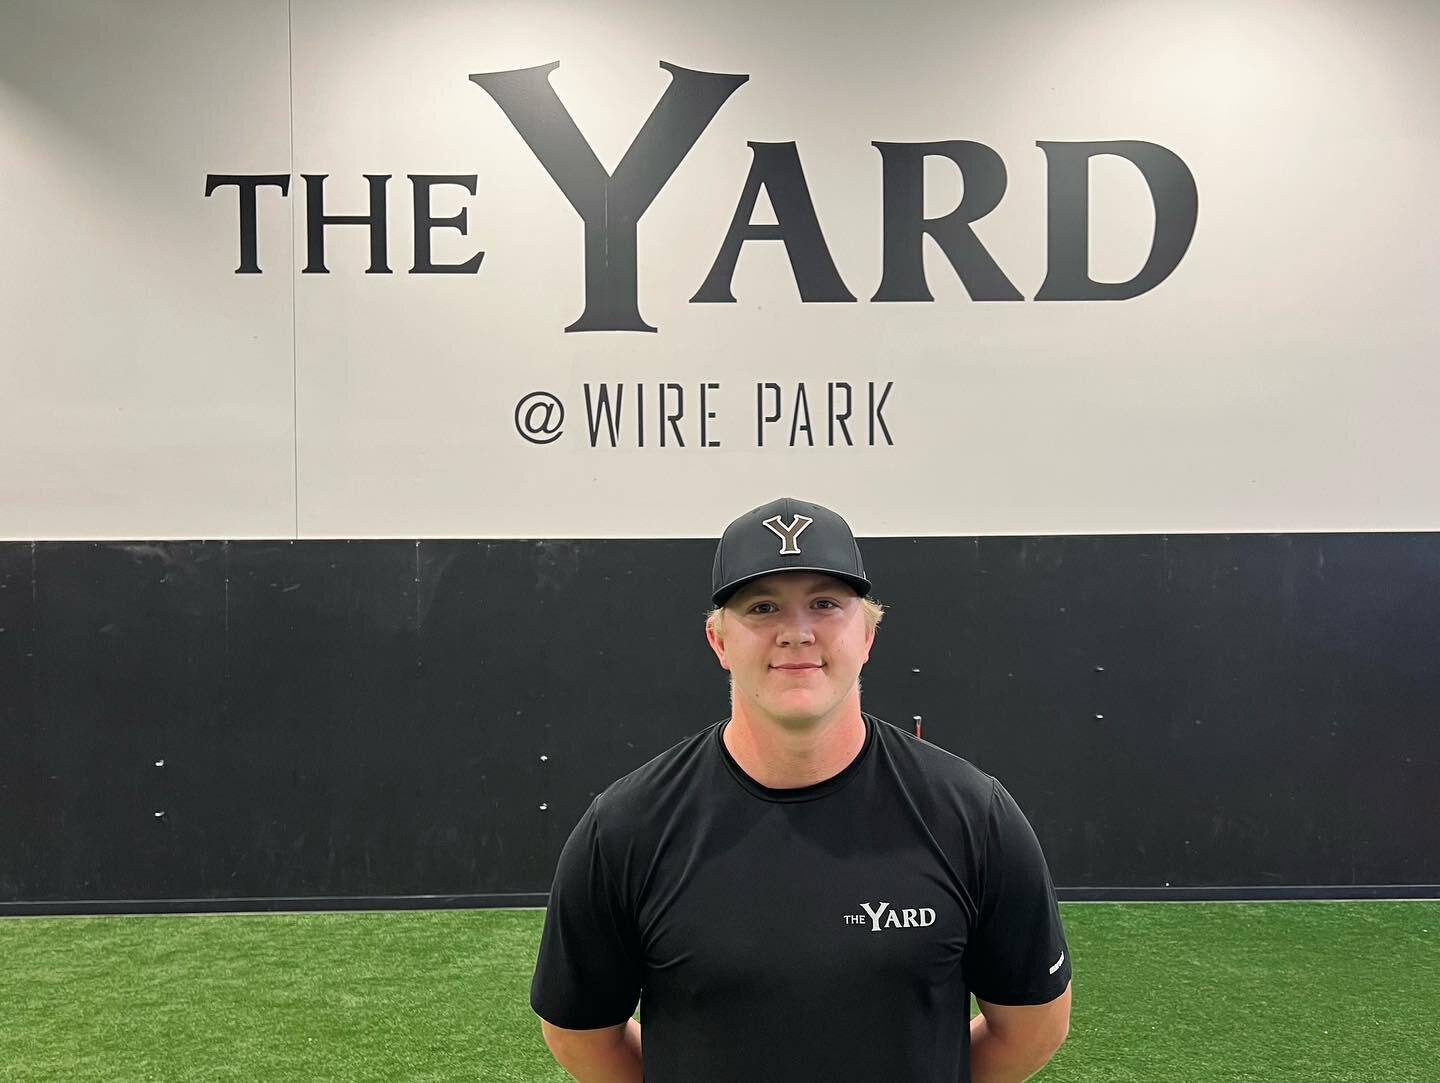 Danny Westbury is on staff with us at The Yard, and he would love to work with your athlete on pitching lessons! Danny pitched at North Greenville University from 2018-2021

Check The Yard @ Wire Park app for Danny&rsquo;s availability!! 

#UnleashTh